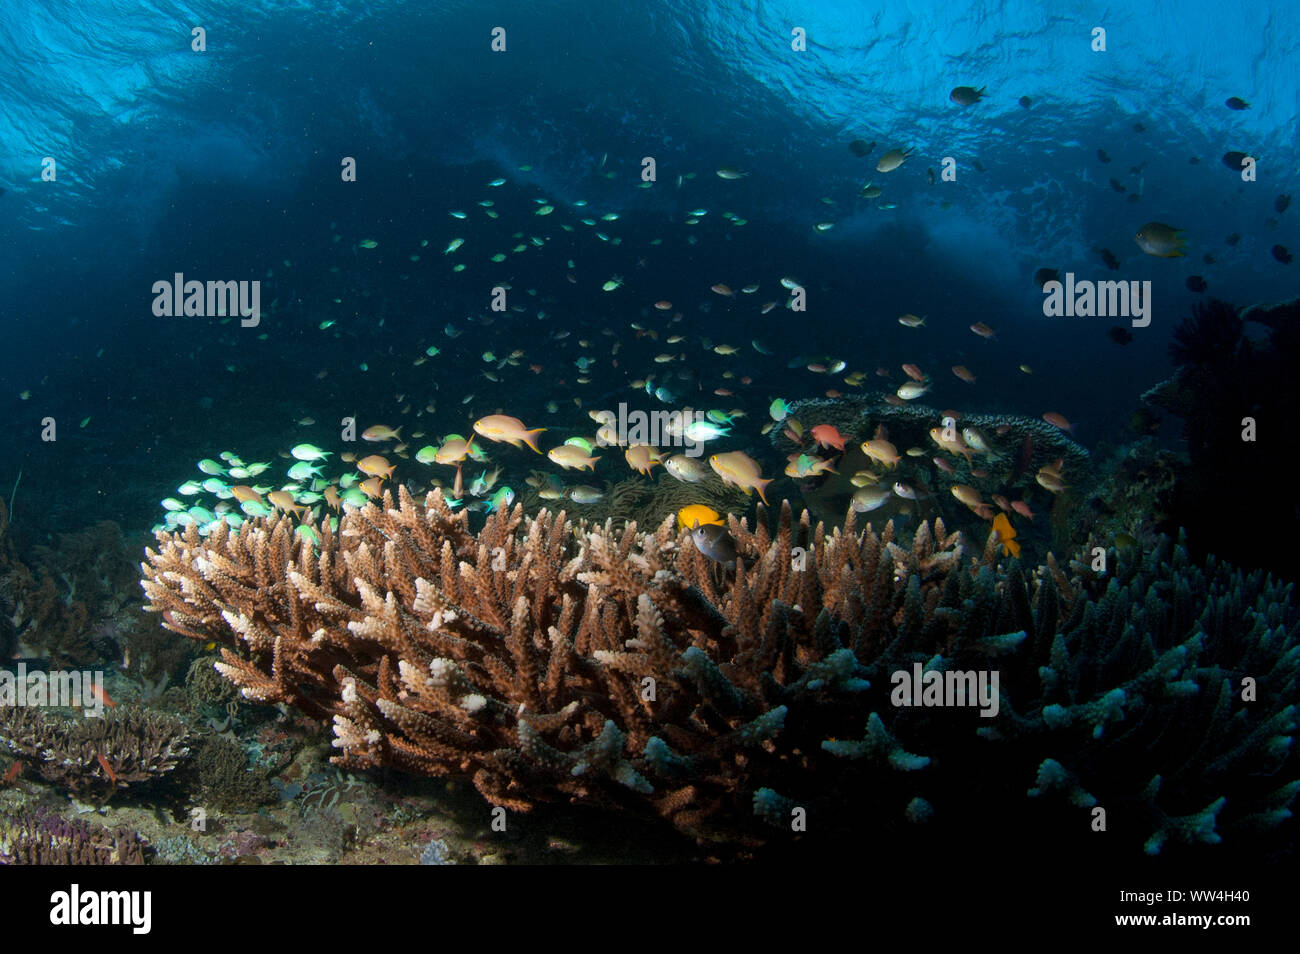 Reef scene with Damsels and Anthias over Staghorn Coral, Coral Gardens dive site, One Tree Island, near Fam Island, Raja Ampat, West Papua, Indonesia Stock Photo